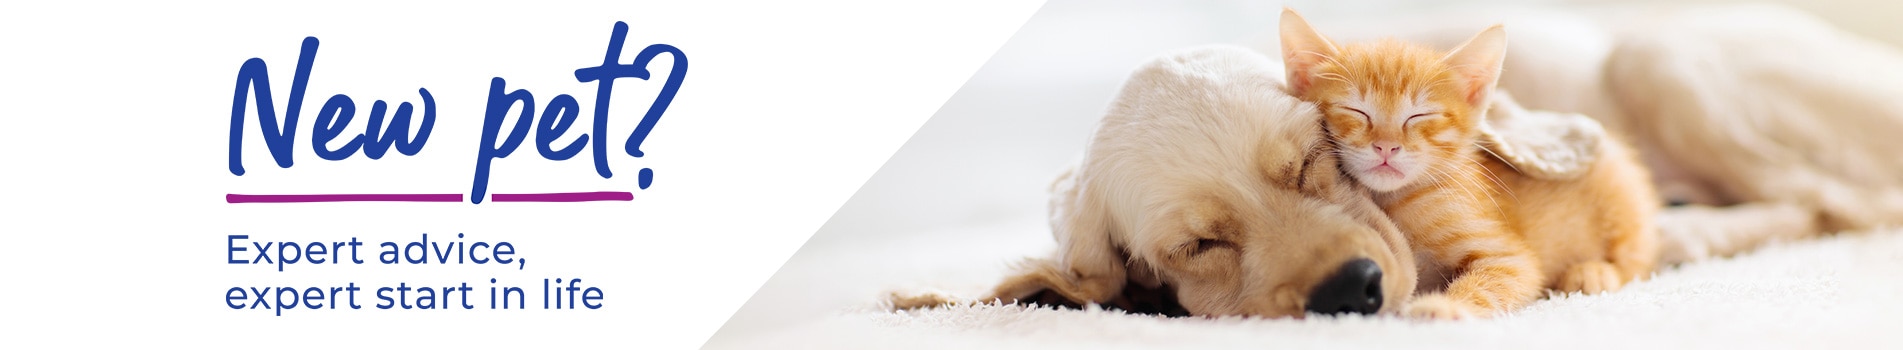 Puppy Advice | Kitten Advice from vets in Chesterfield and Staveley